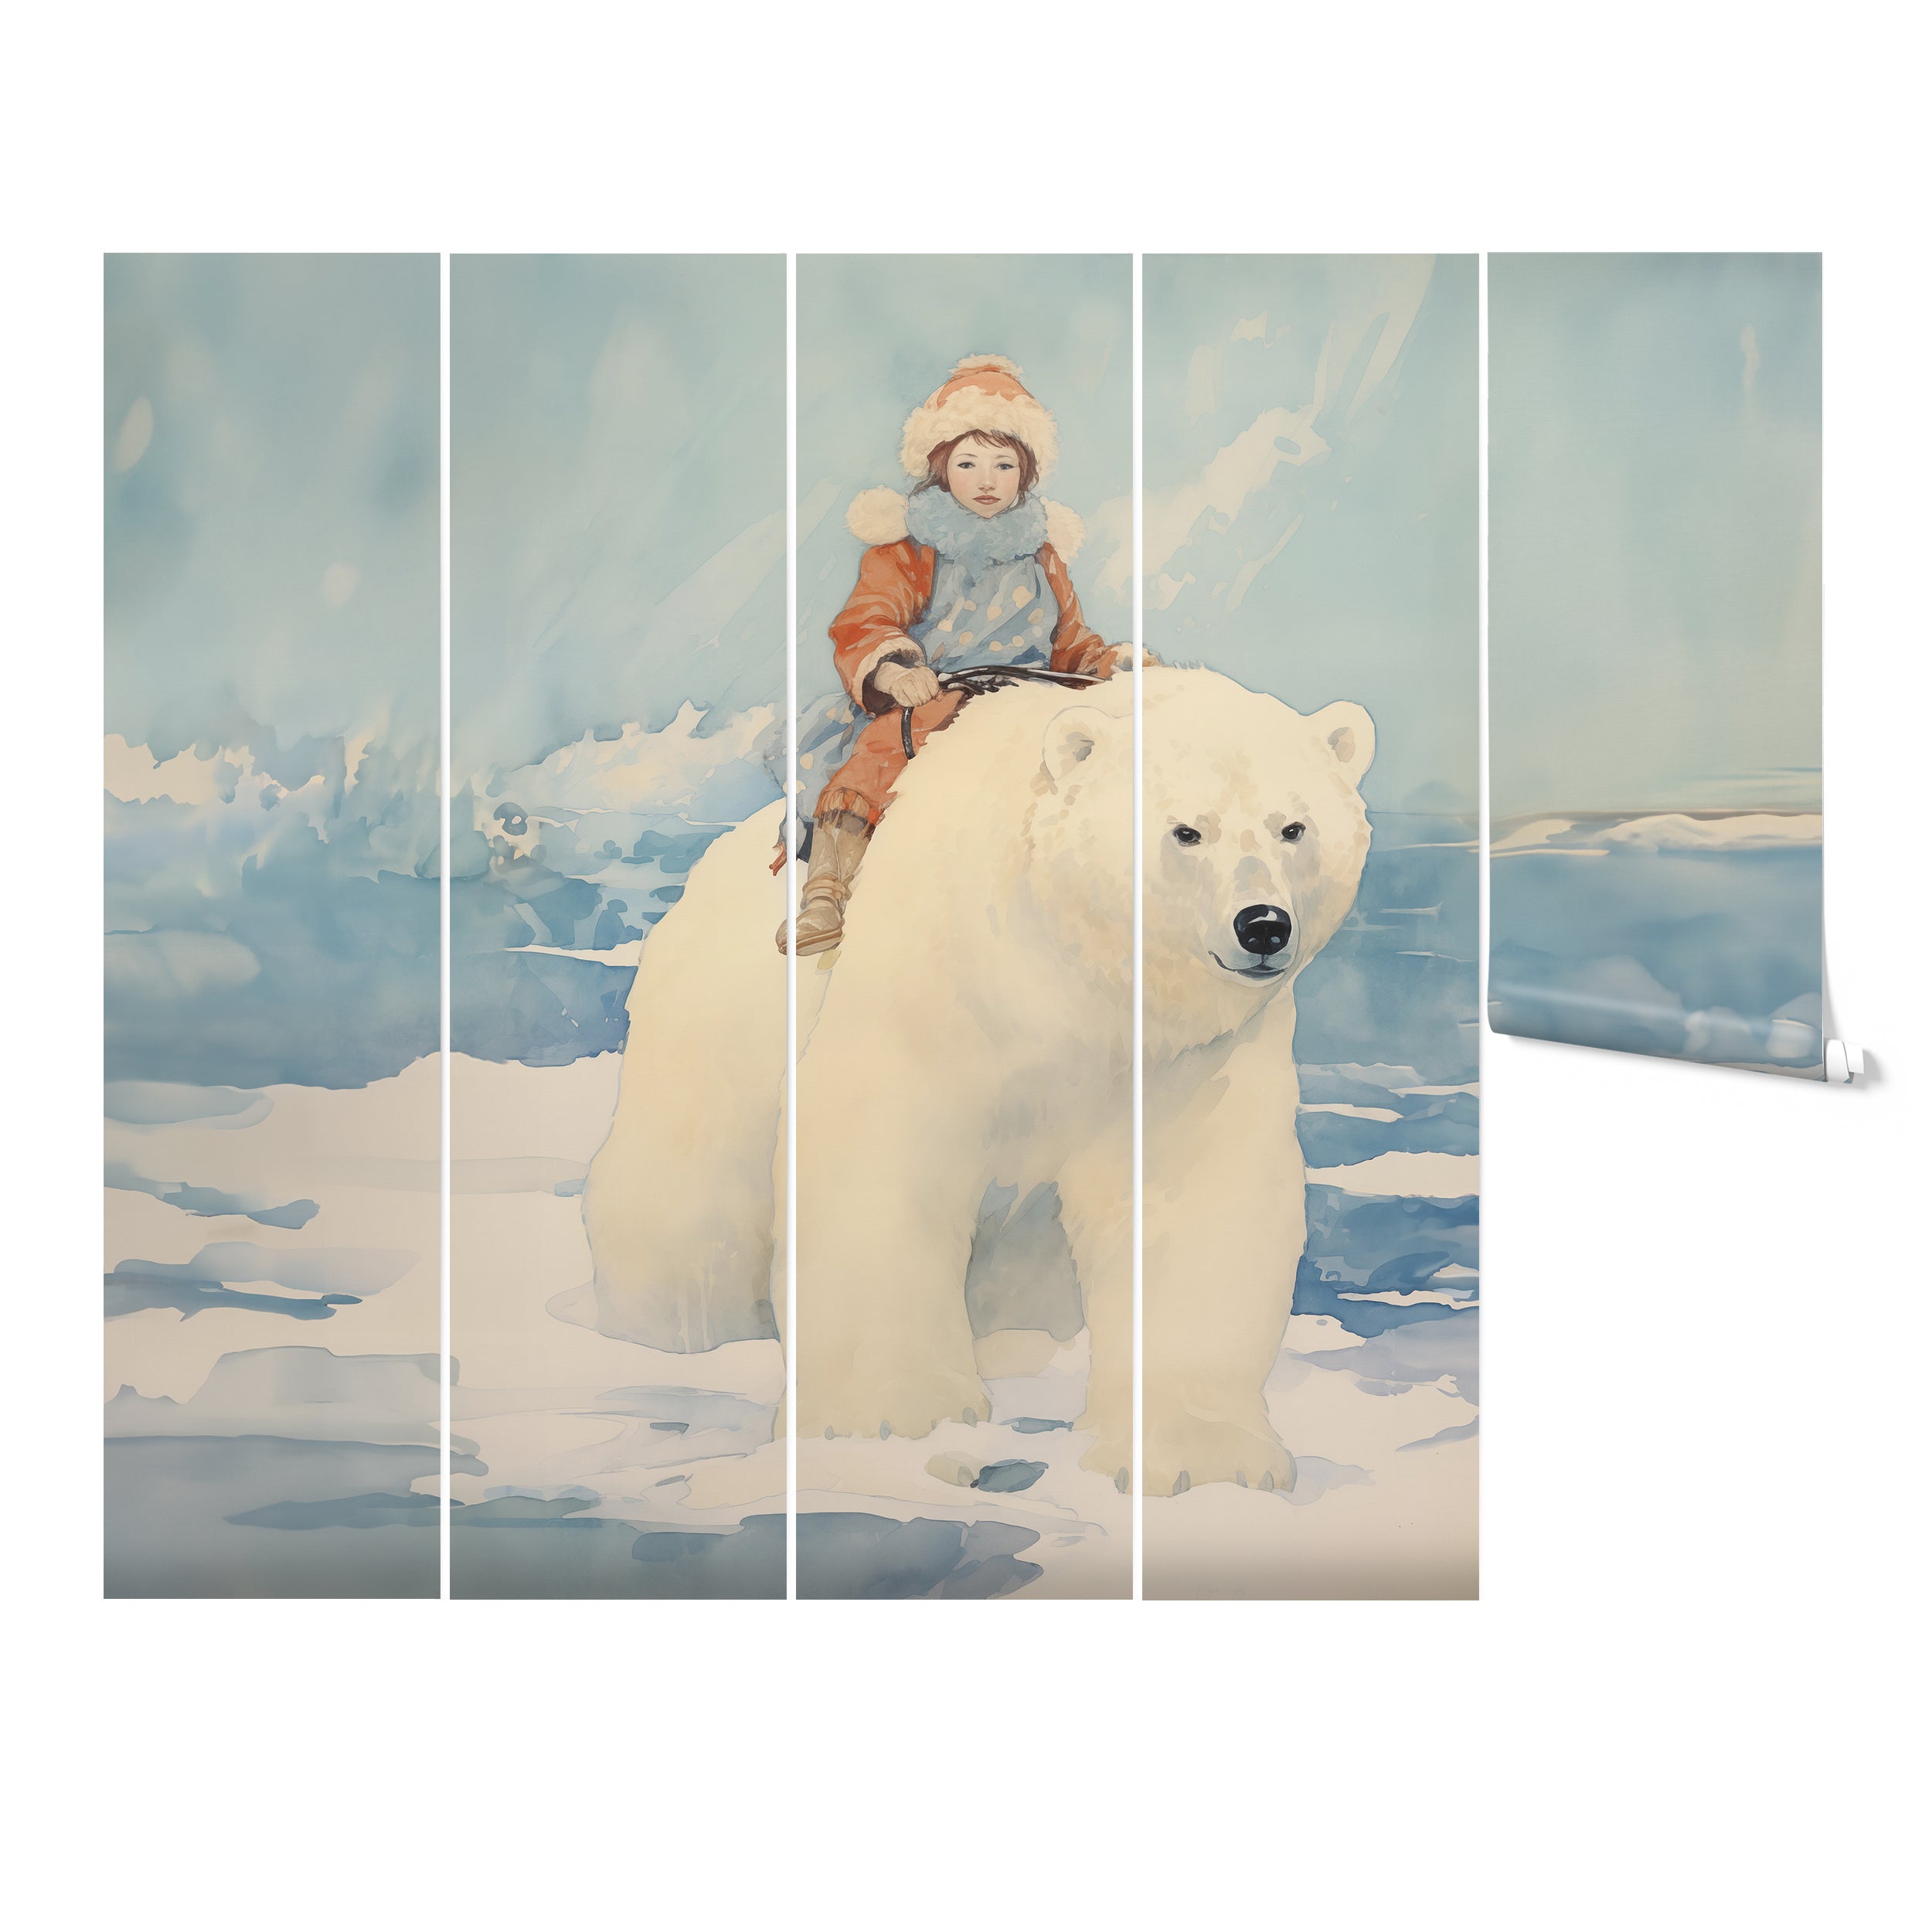 Child riding polar bear in snowy landscape on 'The Golden Compass Mural' wallpaper in a children's room."